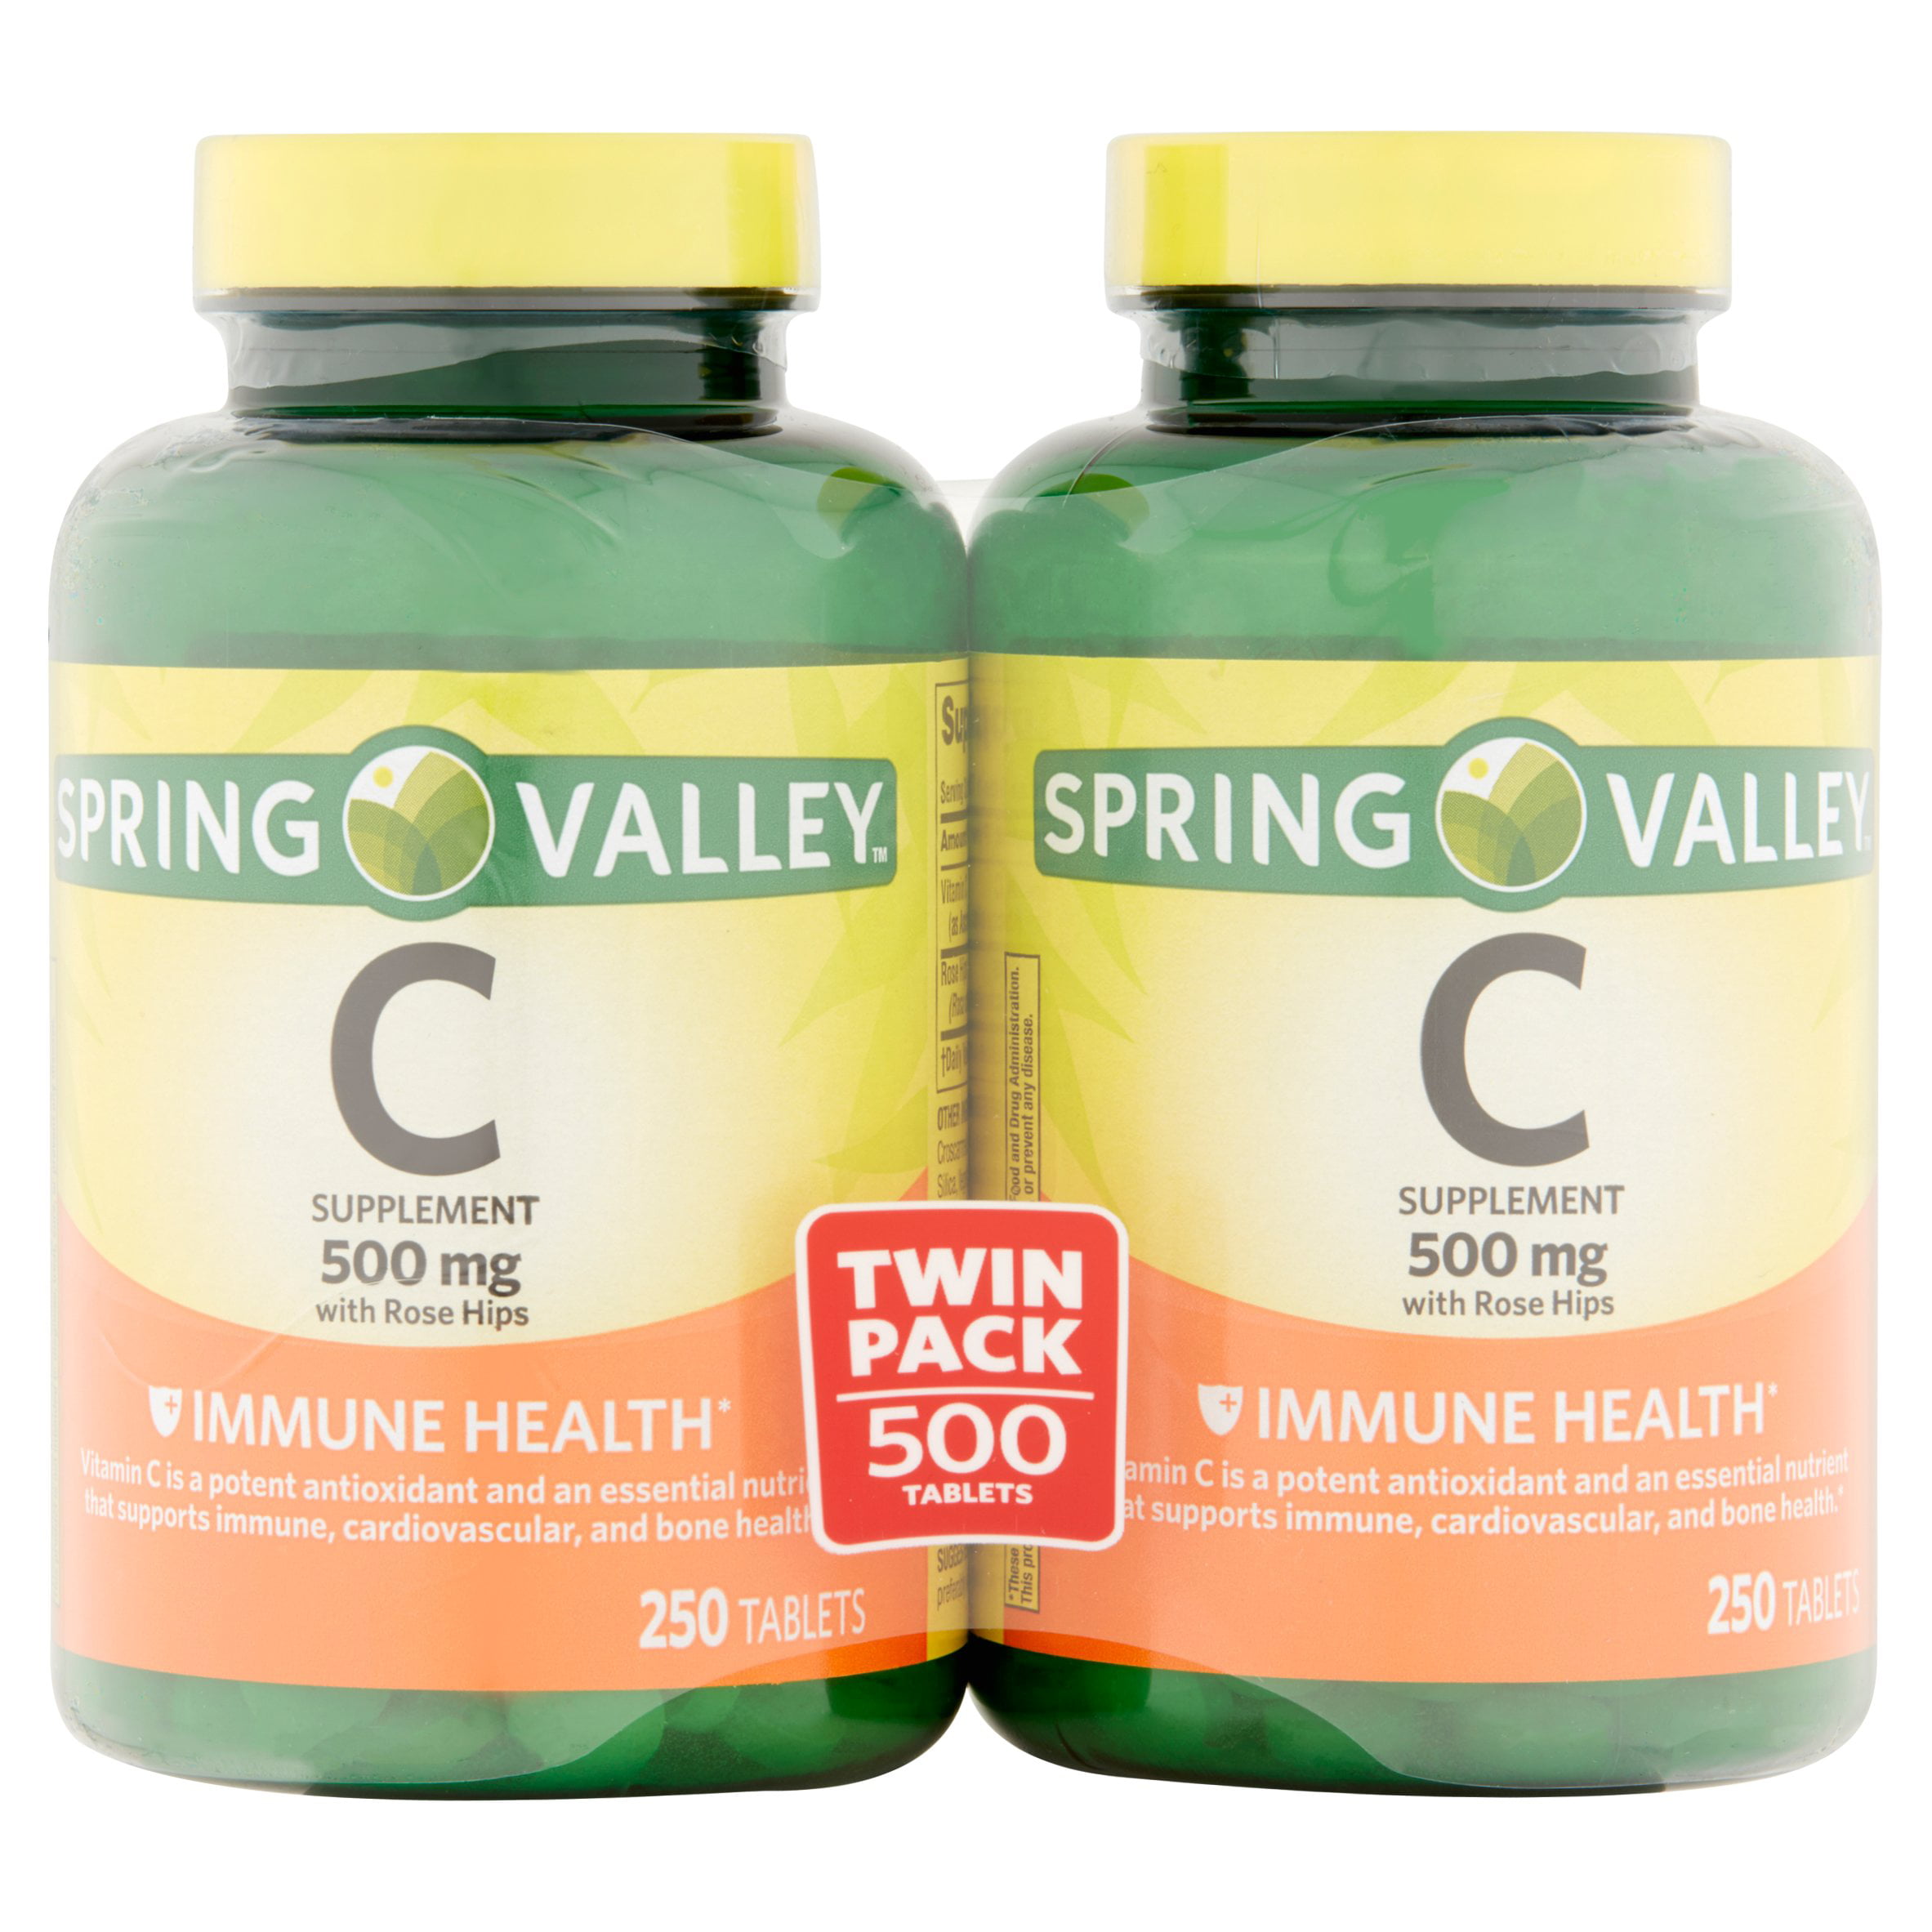 Spring Valley Hair Skin And Nails Supplement Information - Skin And